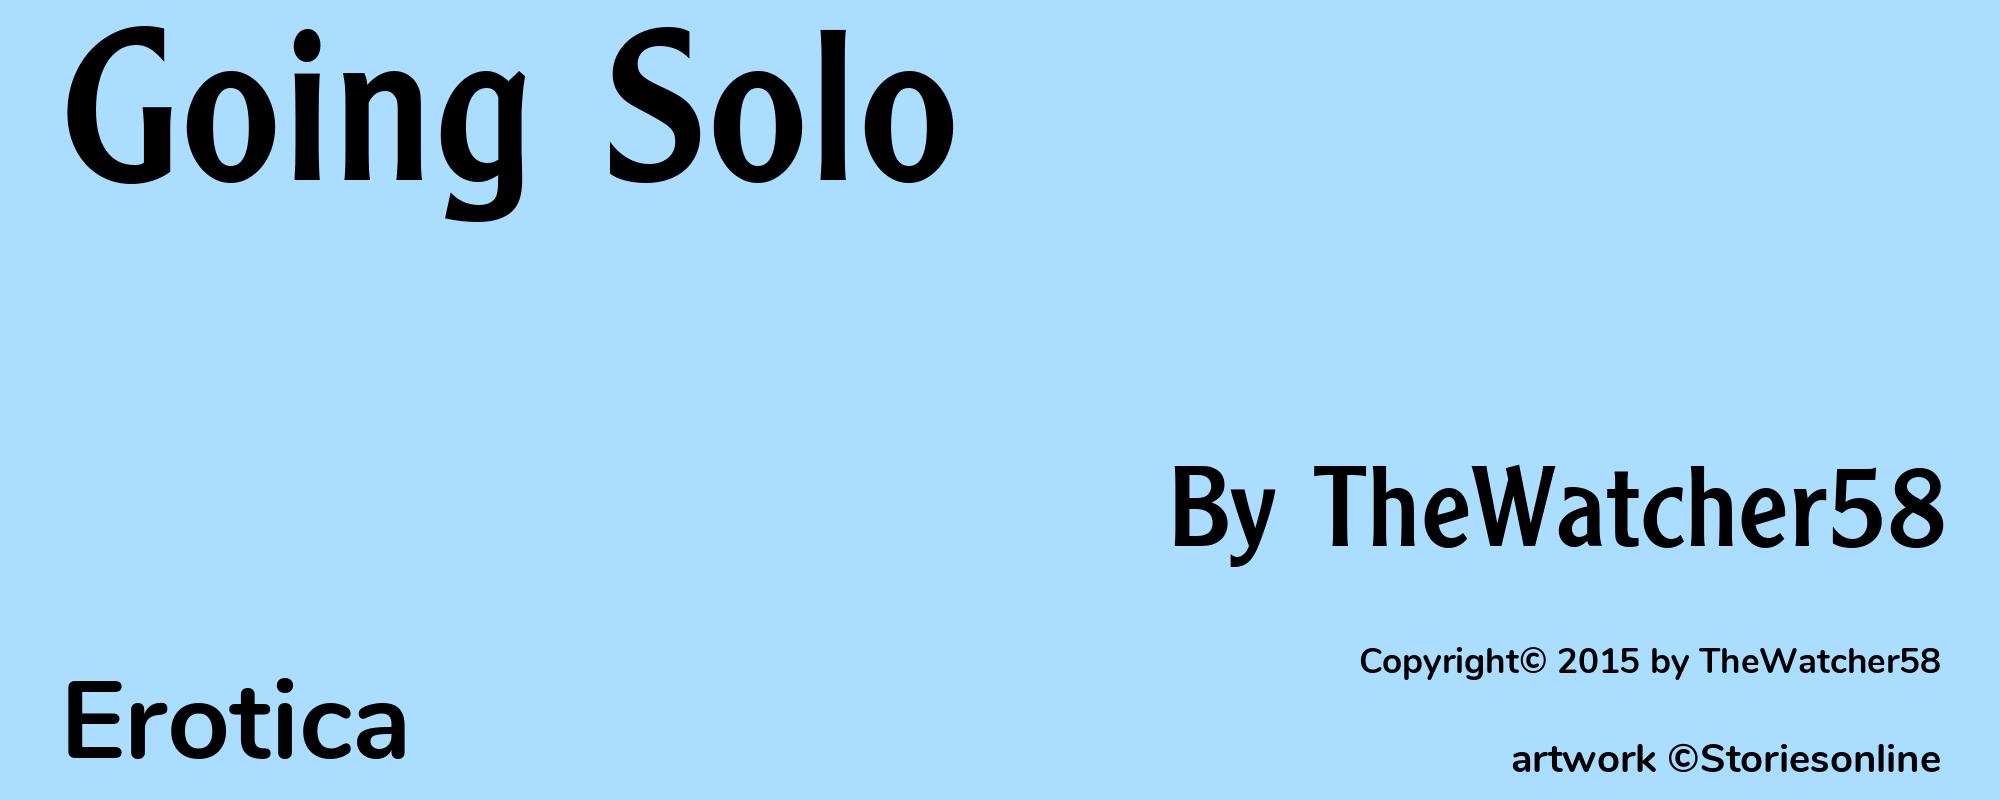 Going Solo - Cover